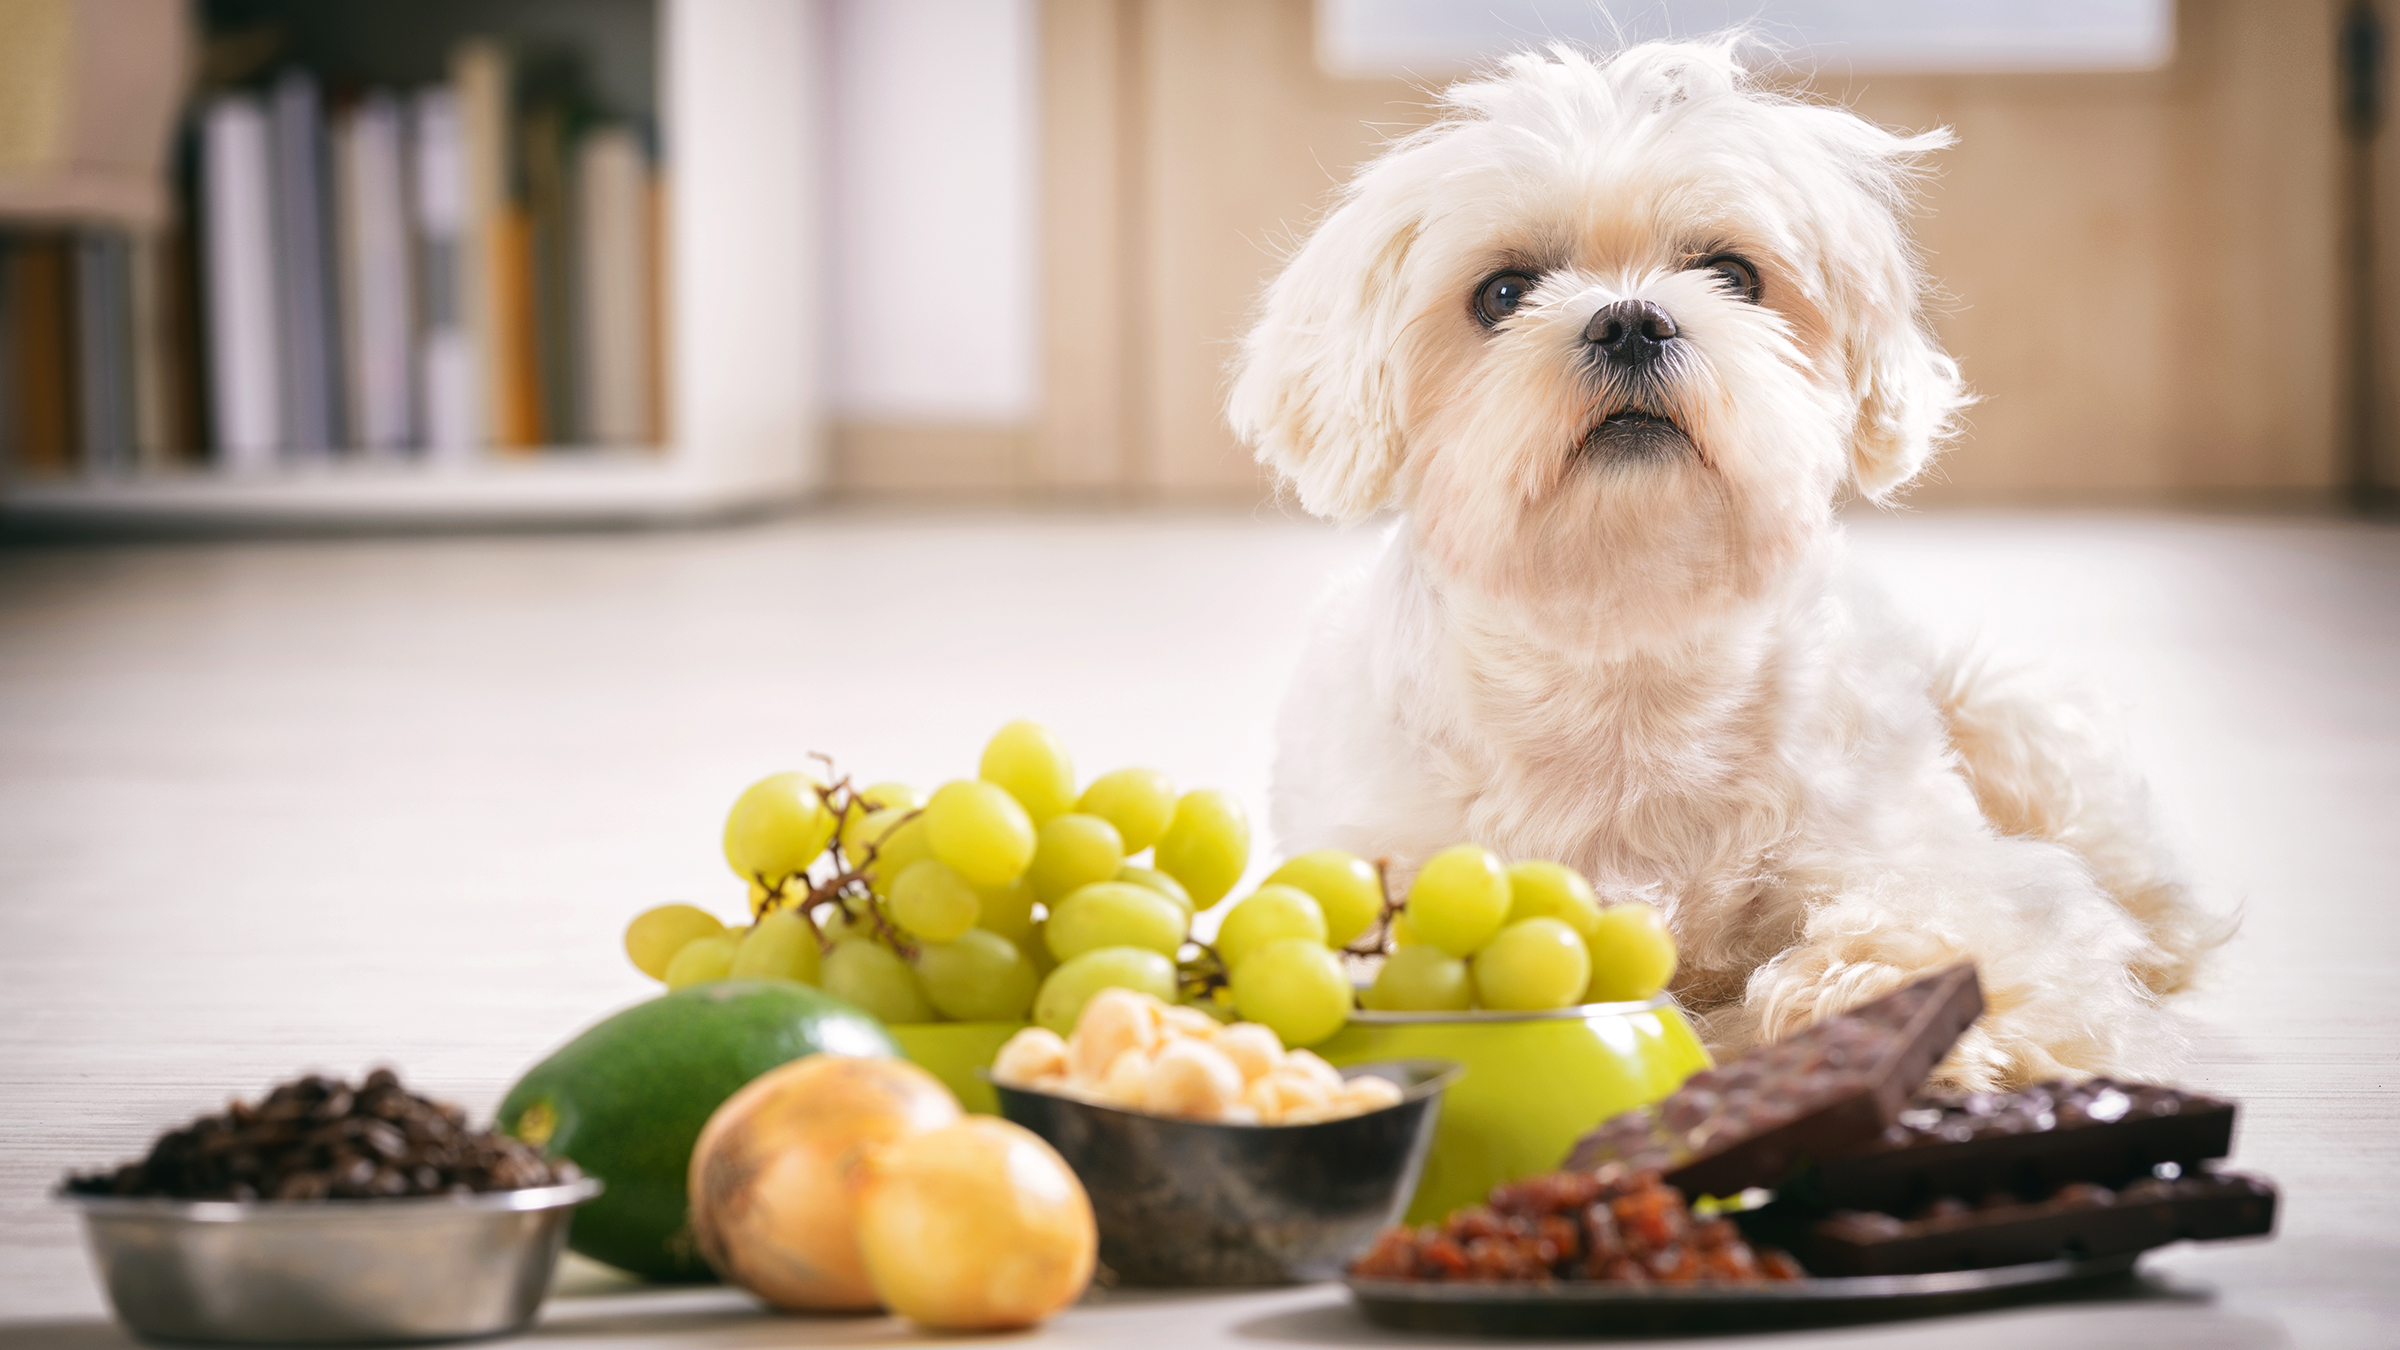 3 Common Household Items That Could Be Lethal to Your Dog